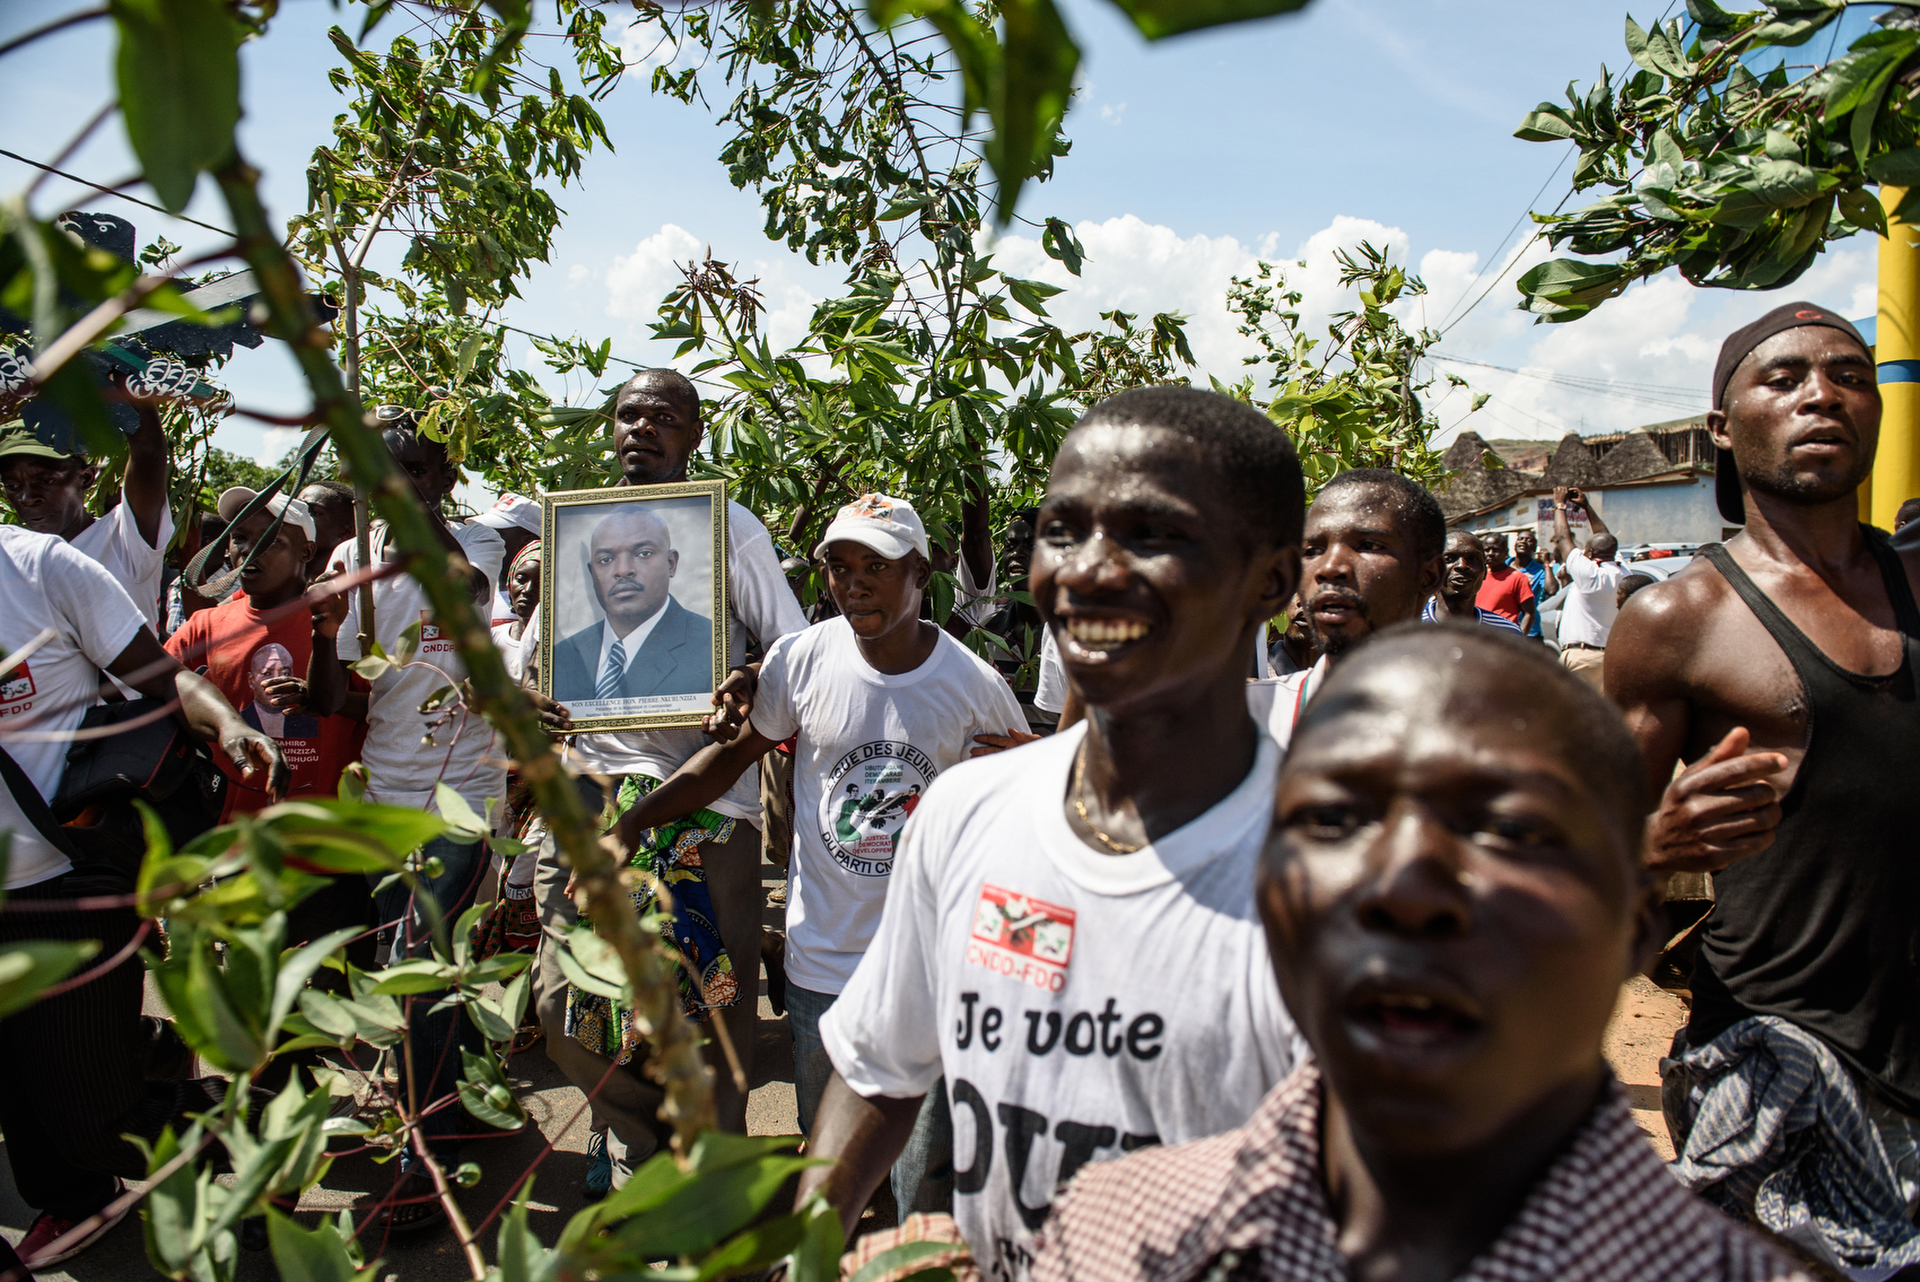  People celebrated the return of President Nkurunziza in the Kamenge quarter of Bujumbura, a CNDD-FDD party stronghold, on 15 May. Nkurunziza drove to the Presidential Palace from his home villa in Ngozi, supporters lined up to sing and shout his nam